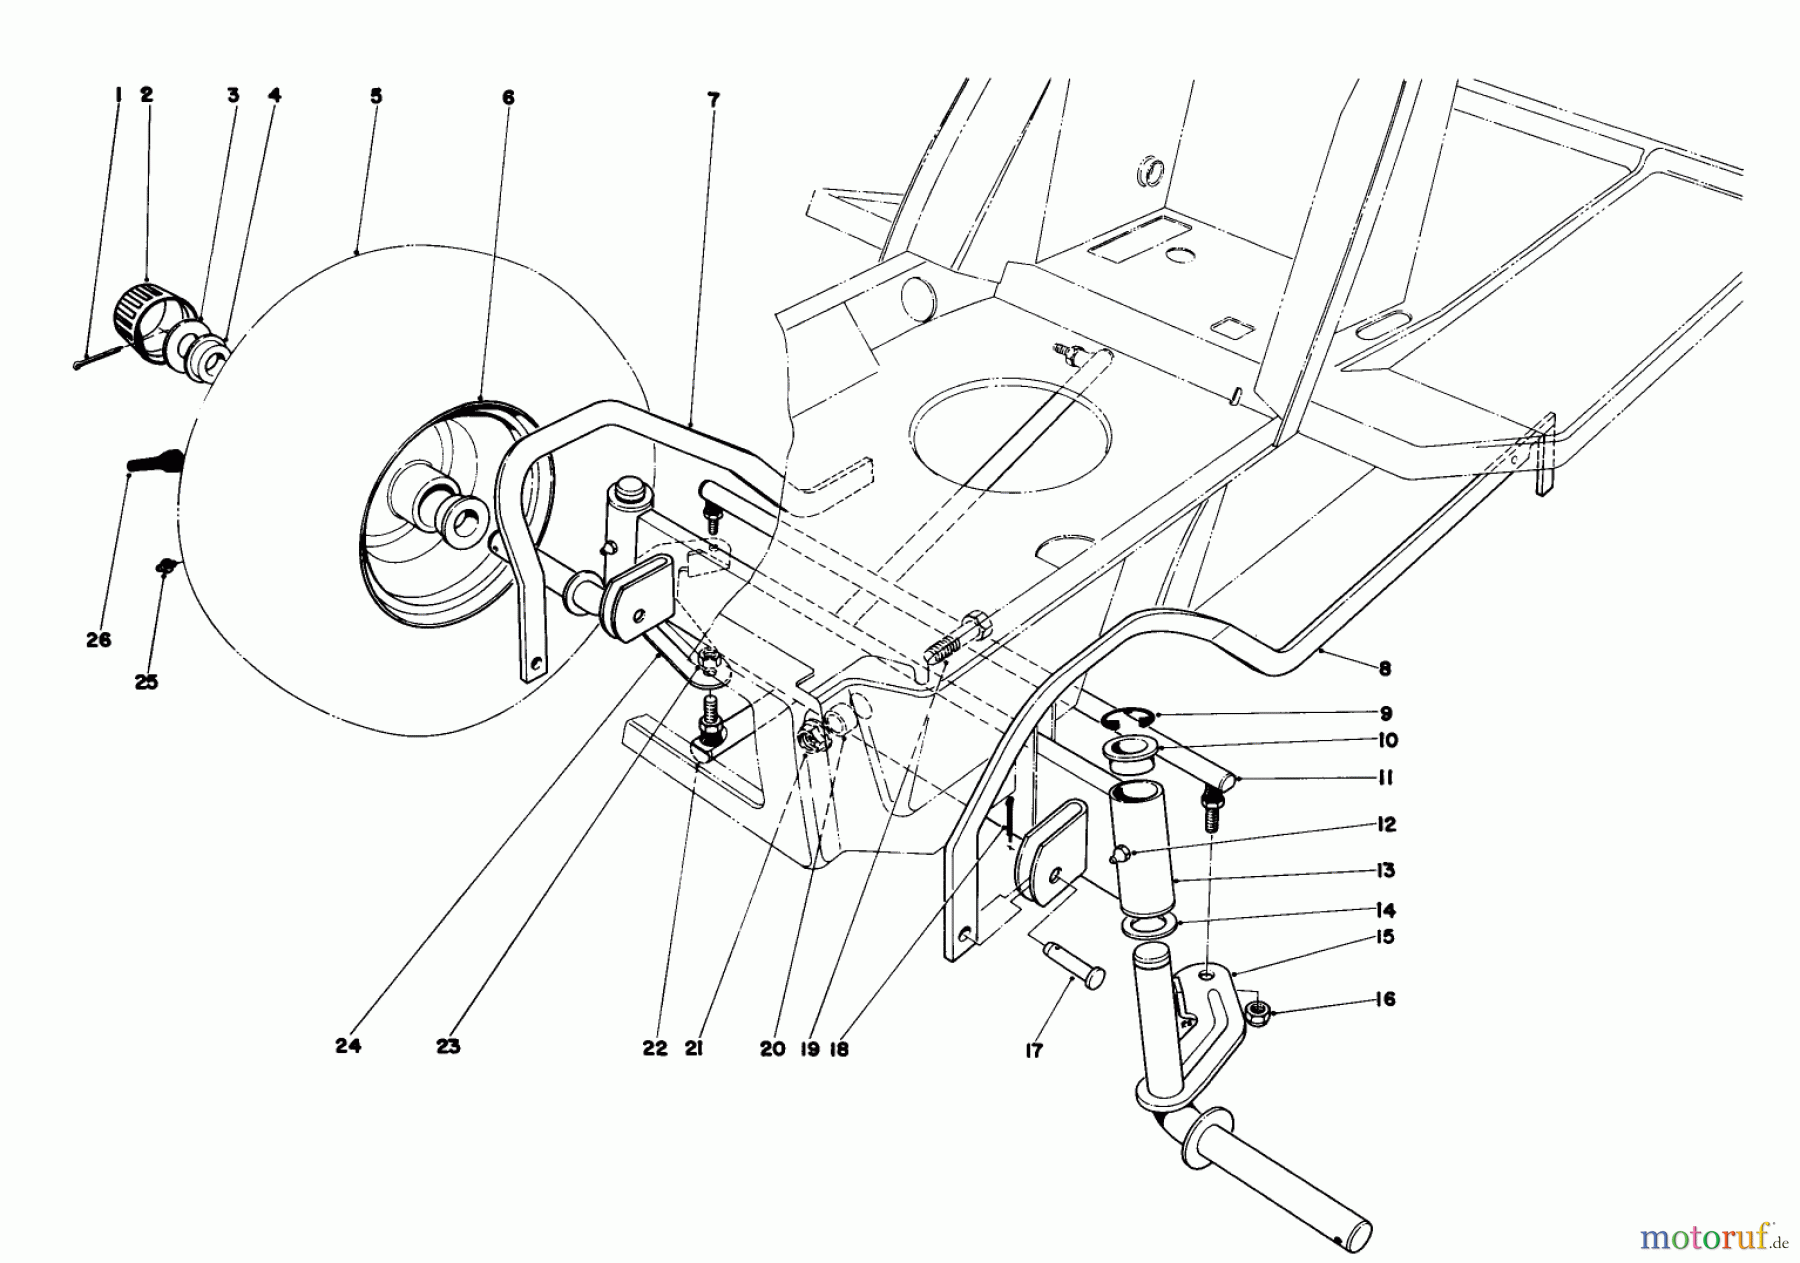  Toro Neu Mowers, Lawn & Garden Tractor Seite 1 57356 (11-42) - Toro 11-42 Lawn Tractor, 1980 (0000001-0999999) FRONT AXLE ASSEMBLY